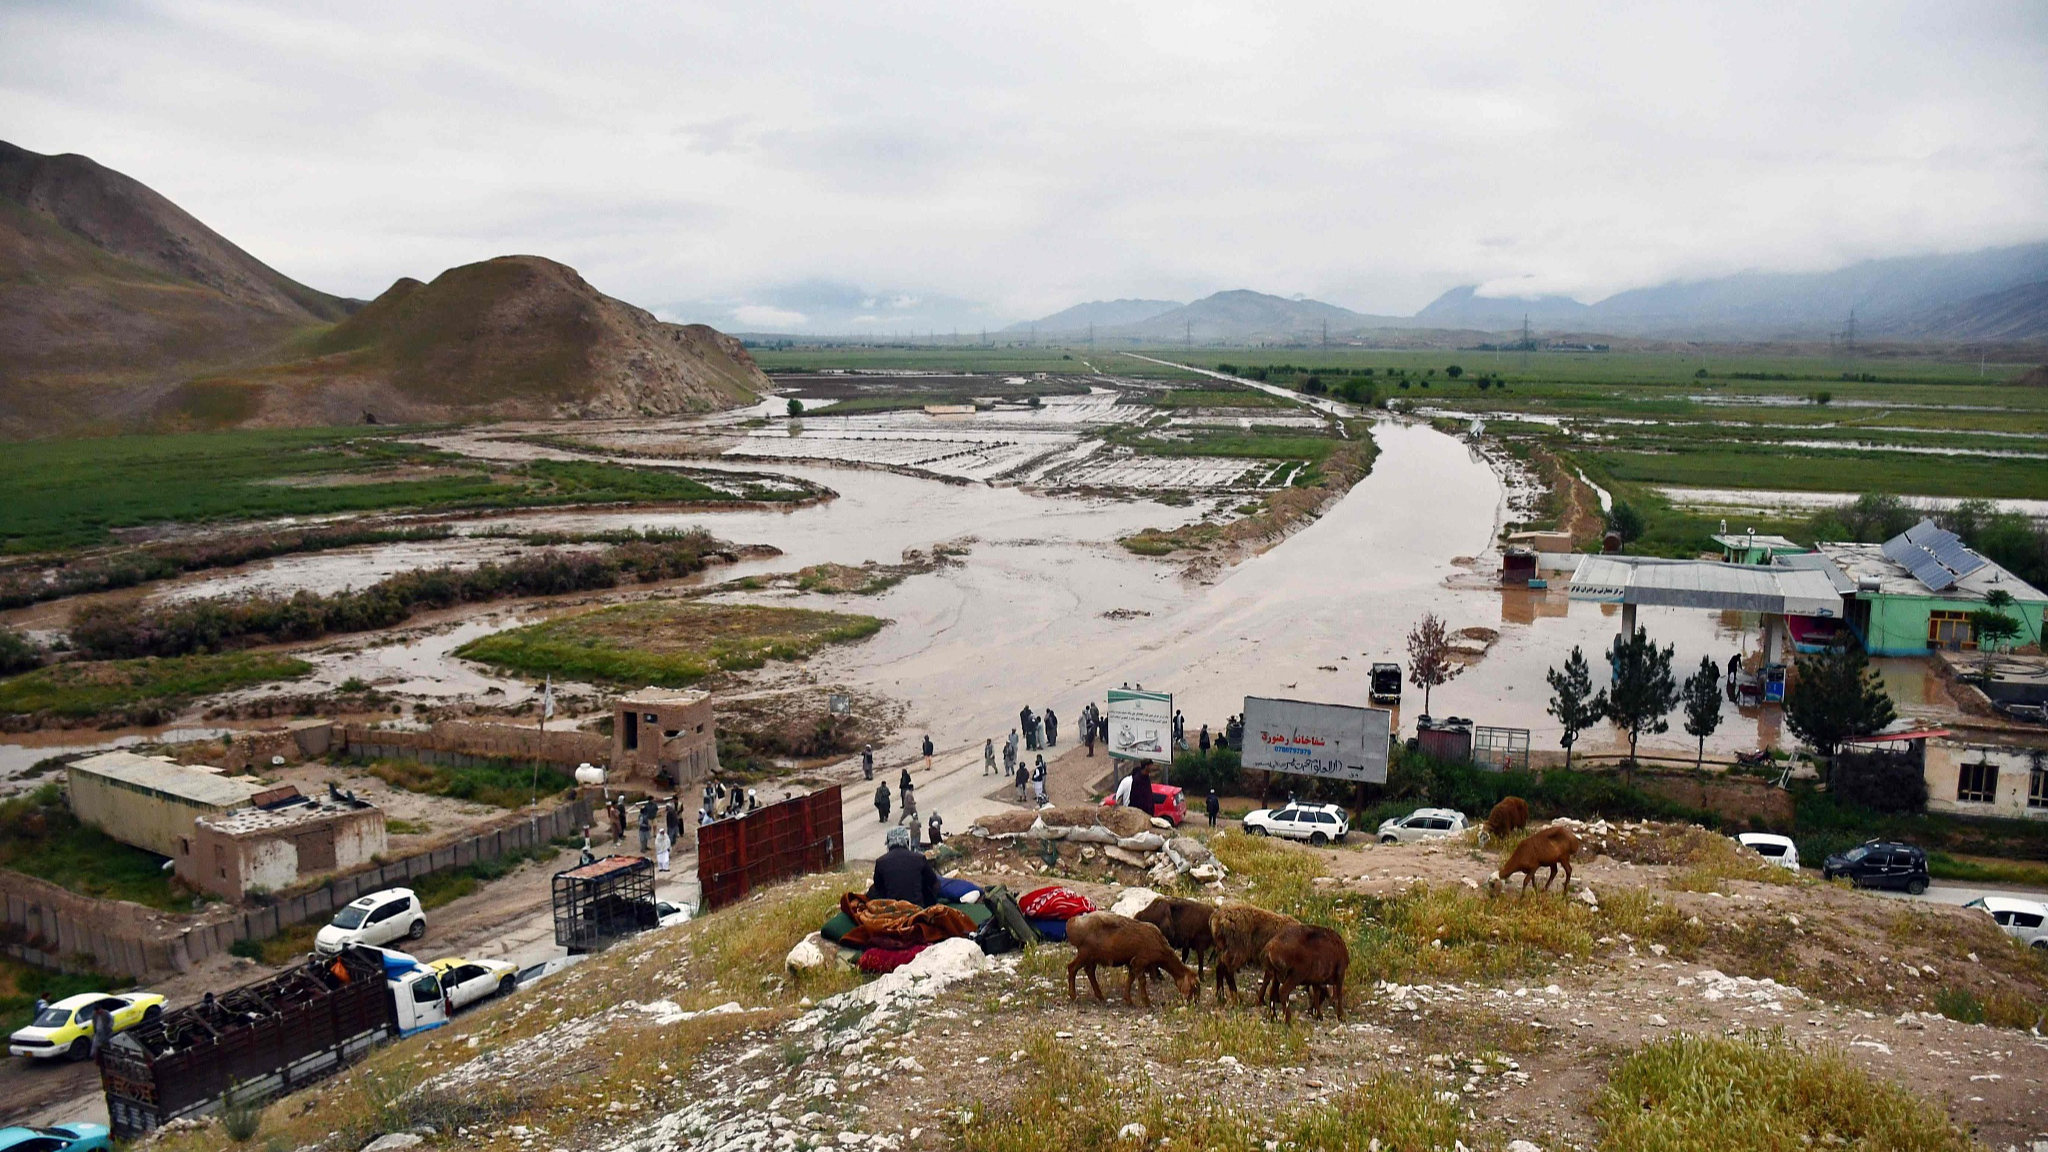 Afgan people gather along a road before a flooded area between Samangan and Mazar-i-Sharif following a flash flood after a heavy rainfall in Feroz Nakhchir district of Samangan Province on May 11, 2024. /CFP